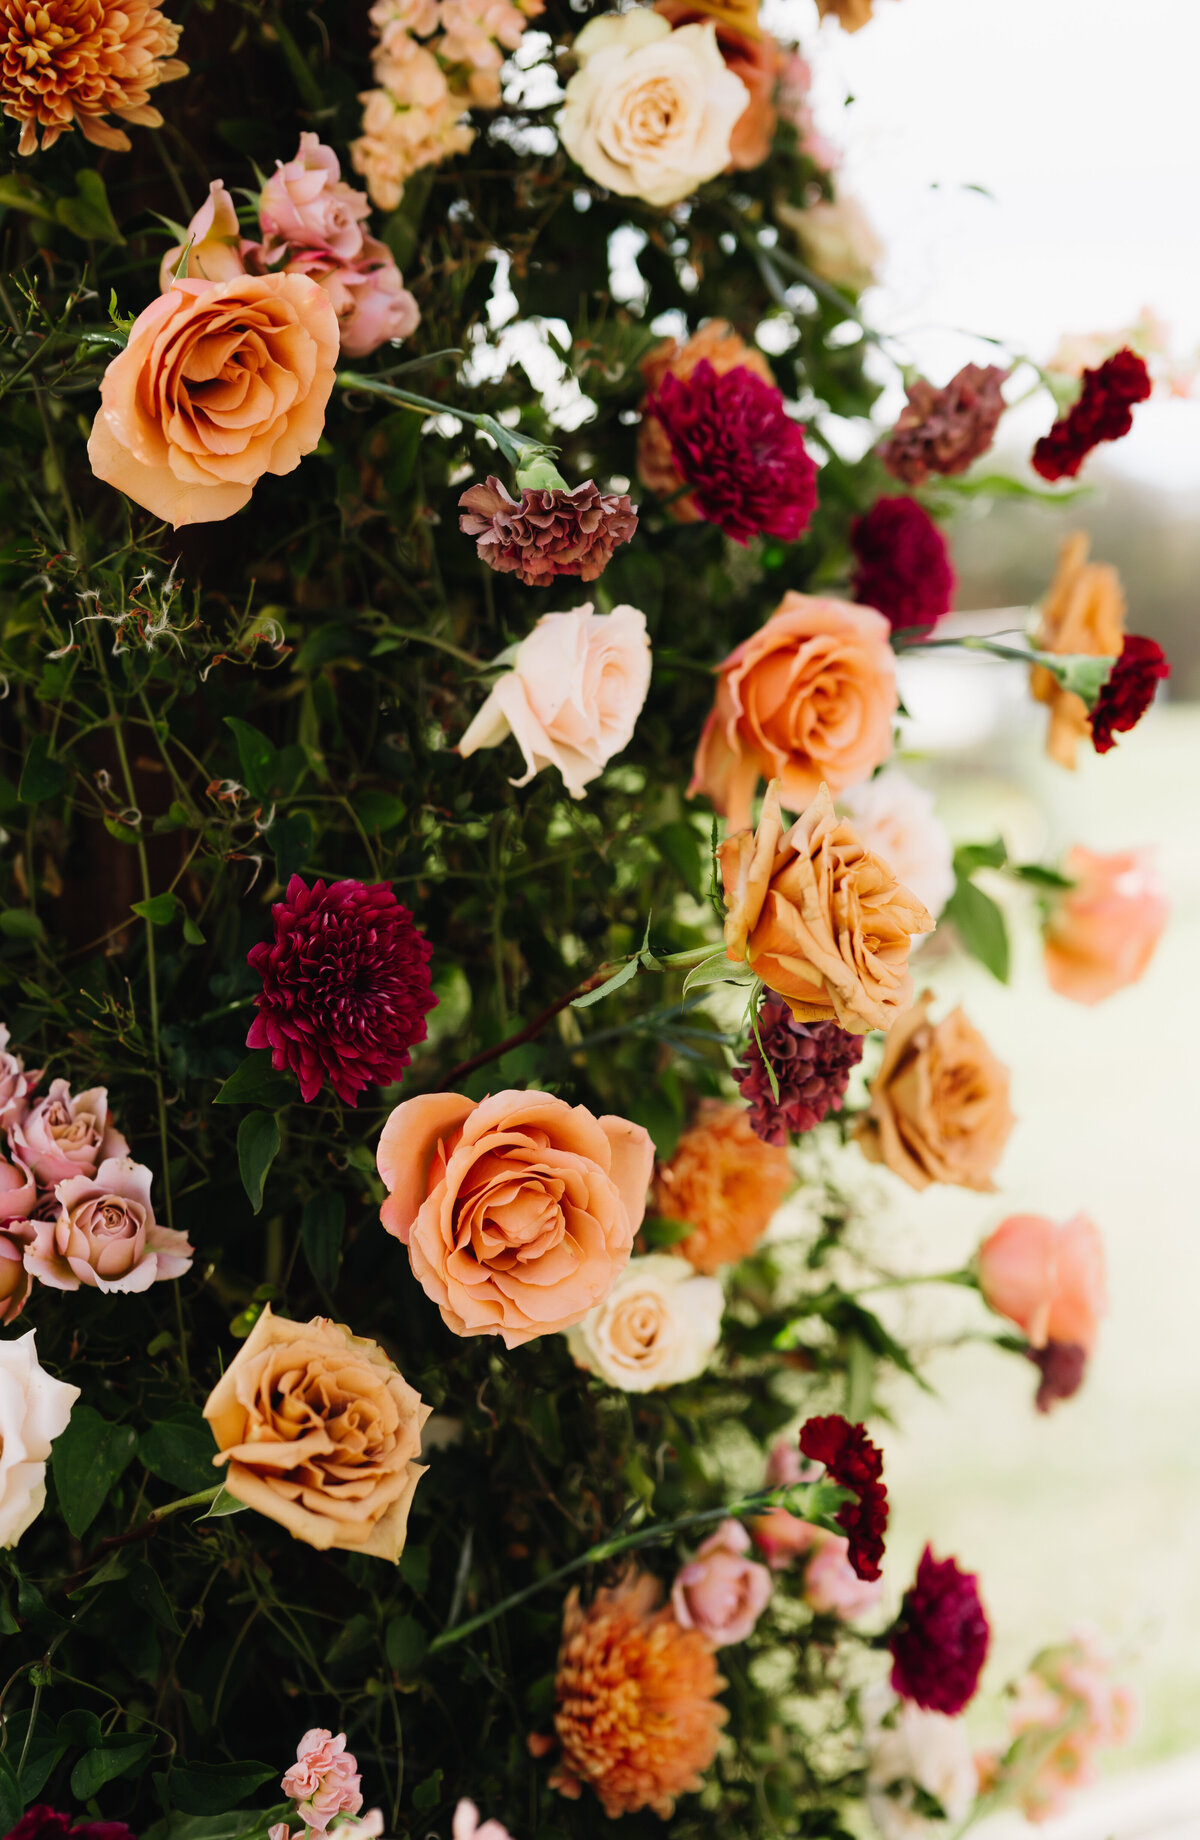 warm tone wedding florals in an arrangement at Charlottesville wedding venues ceremony space with mostly greenery and touches of orange and red flowers captured by Virginia wedding photographer